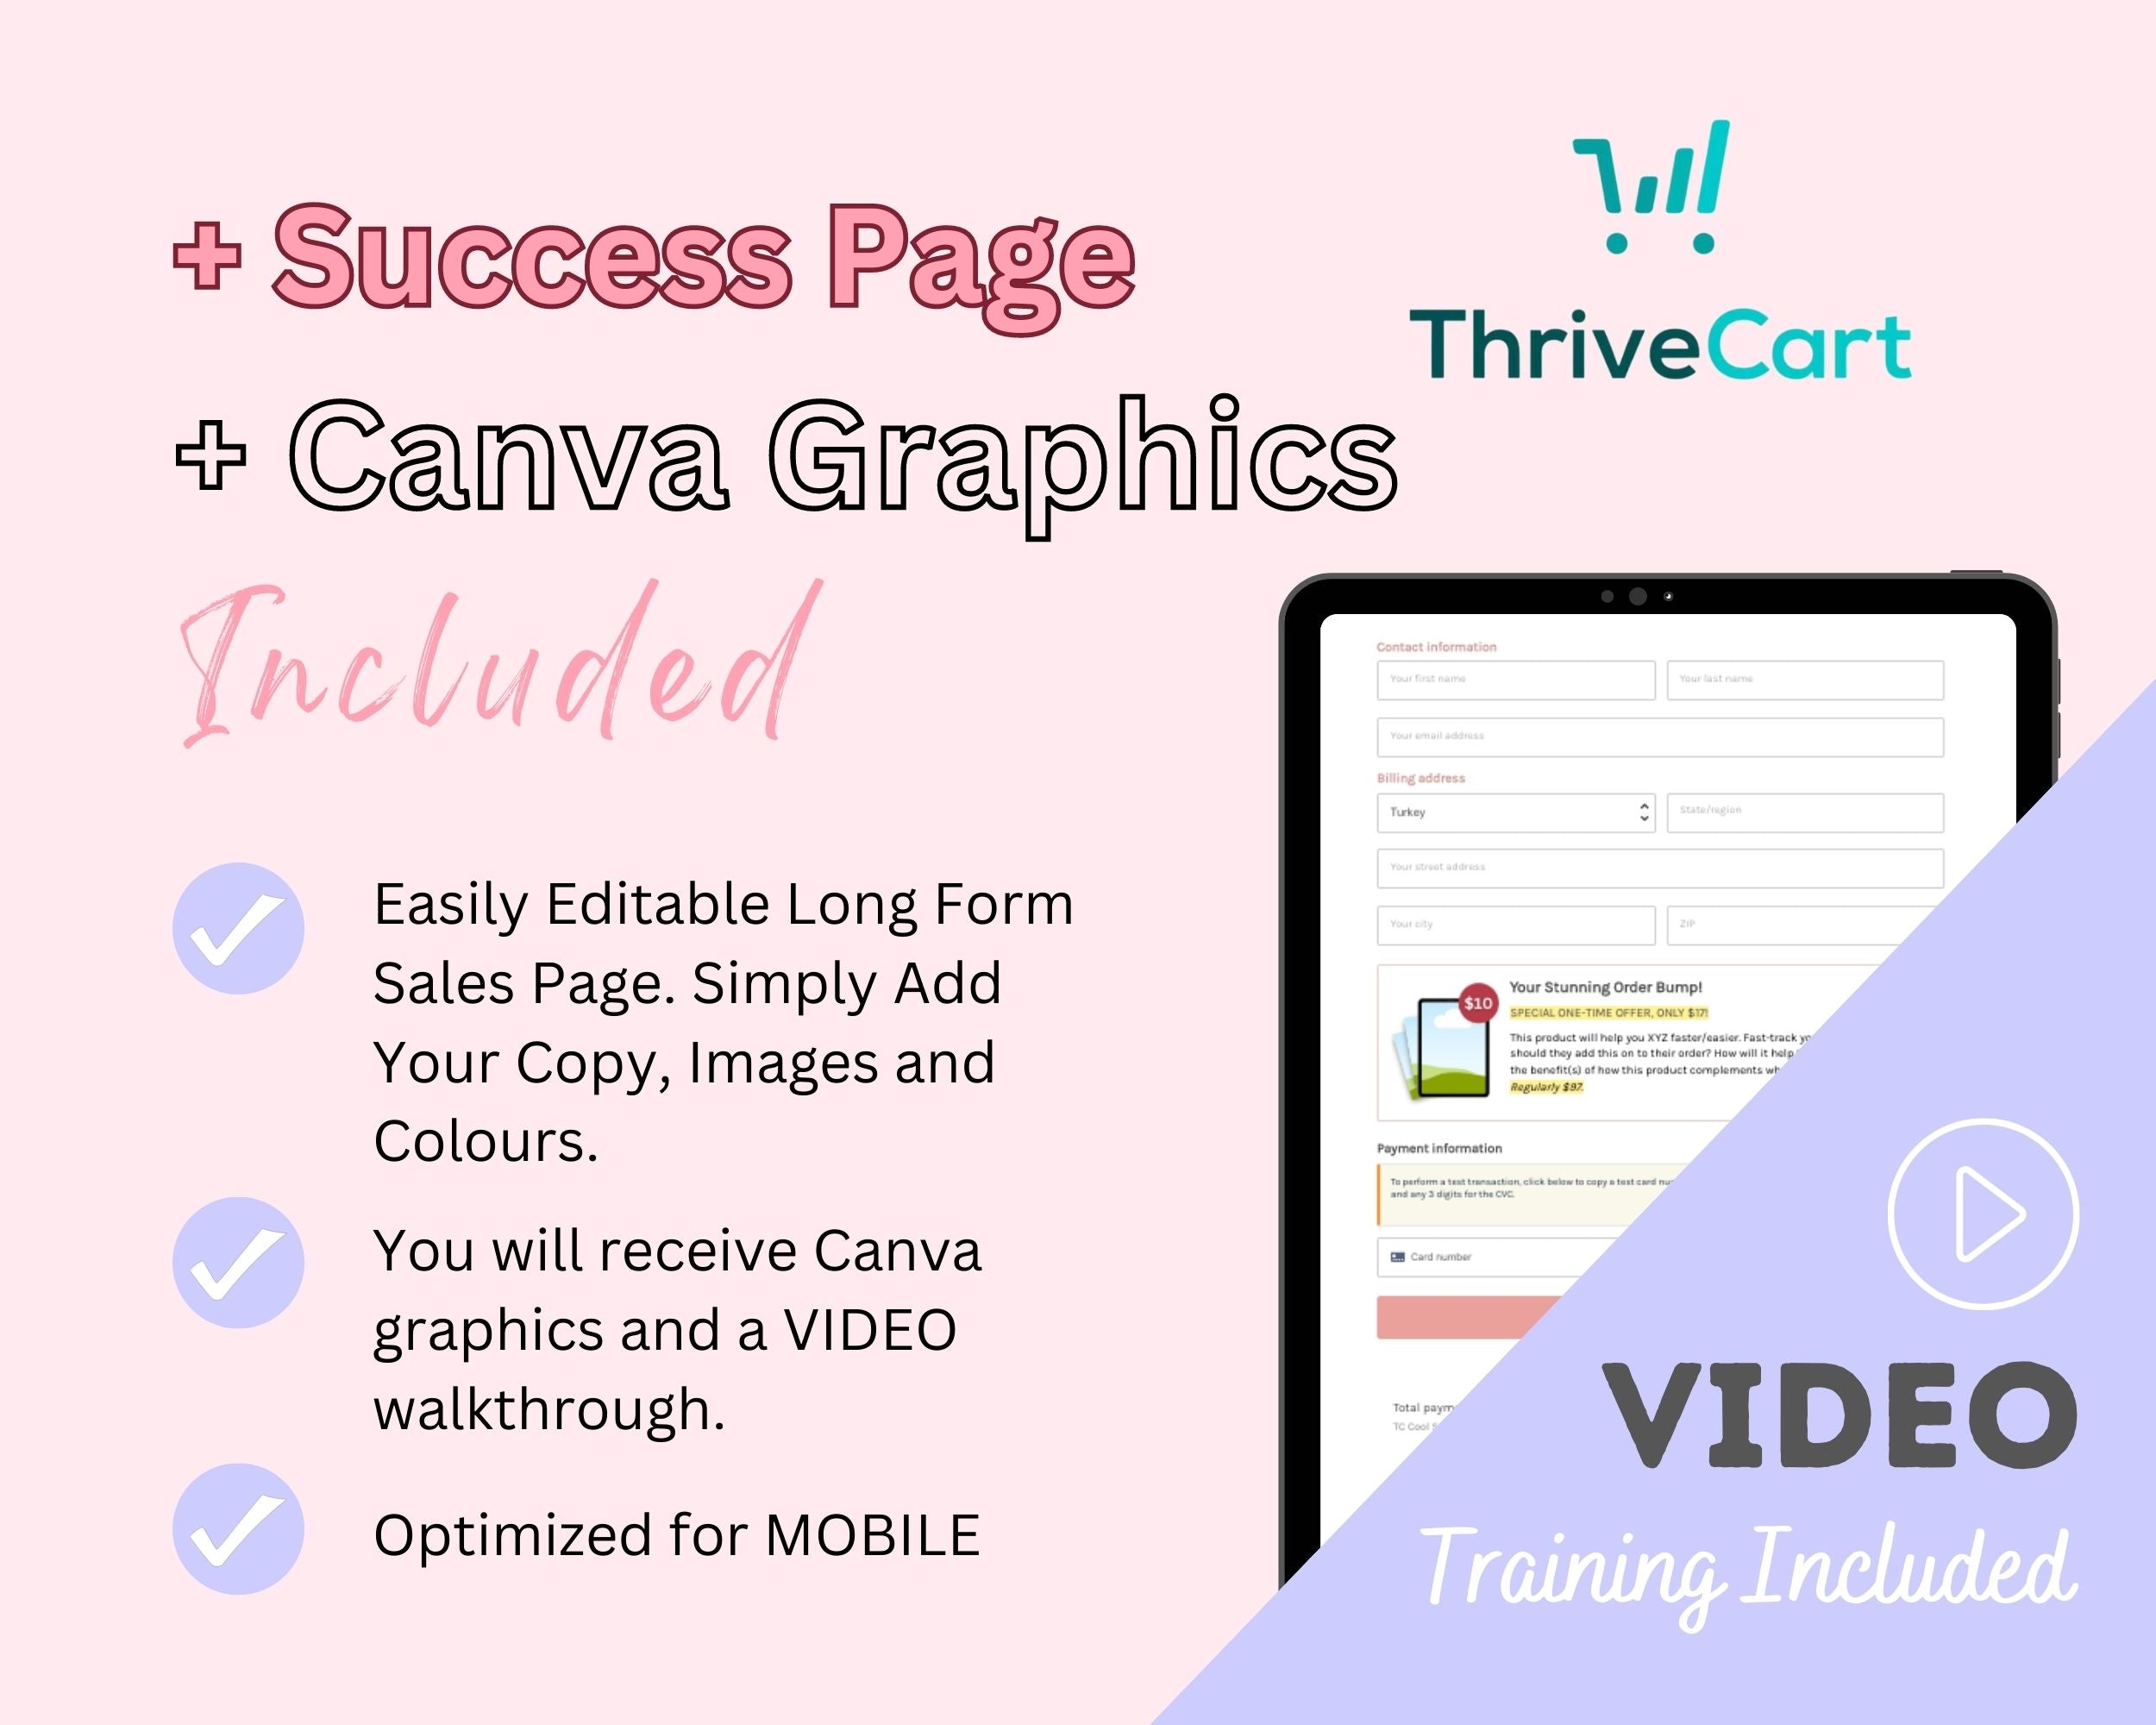 Cool Summer Sales Page Template in ThriveCart